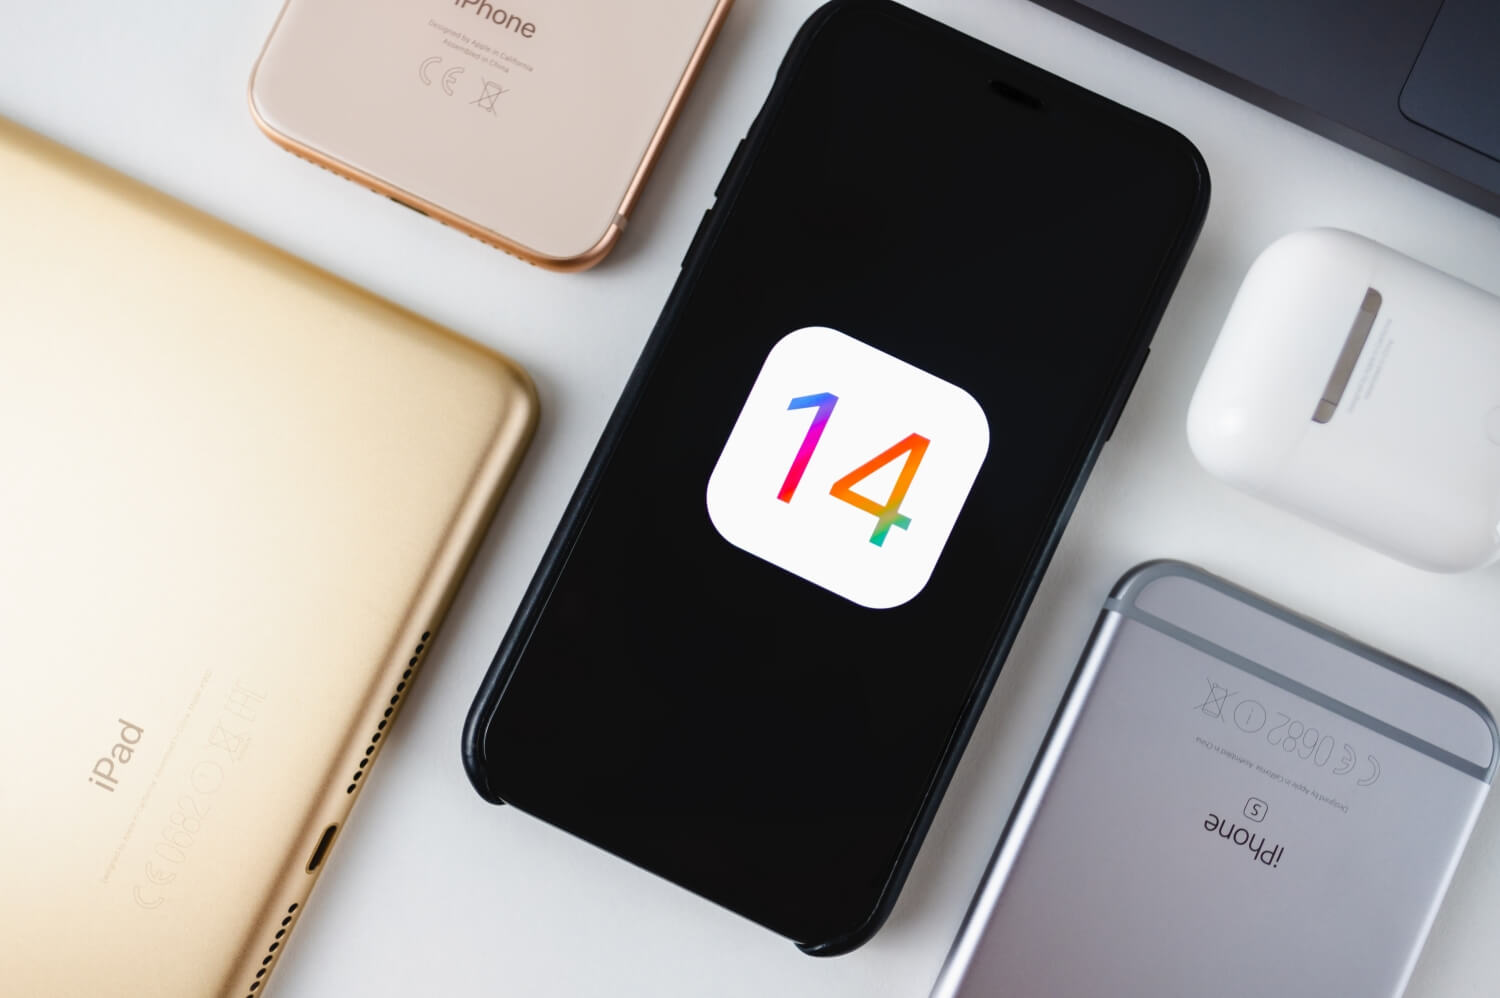 iOS 14 has been circulating among security researchers and hackers since at least February